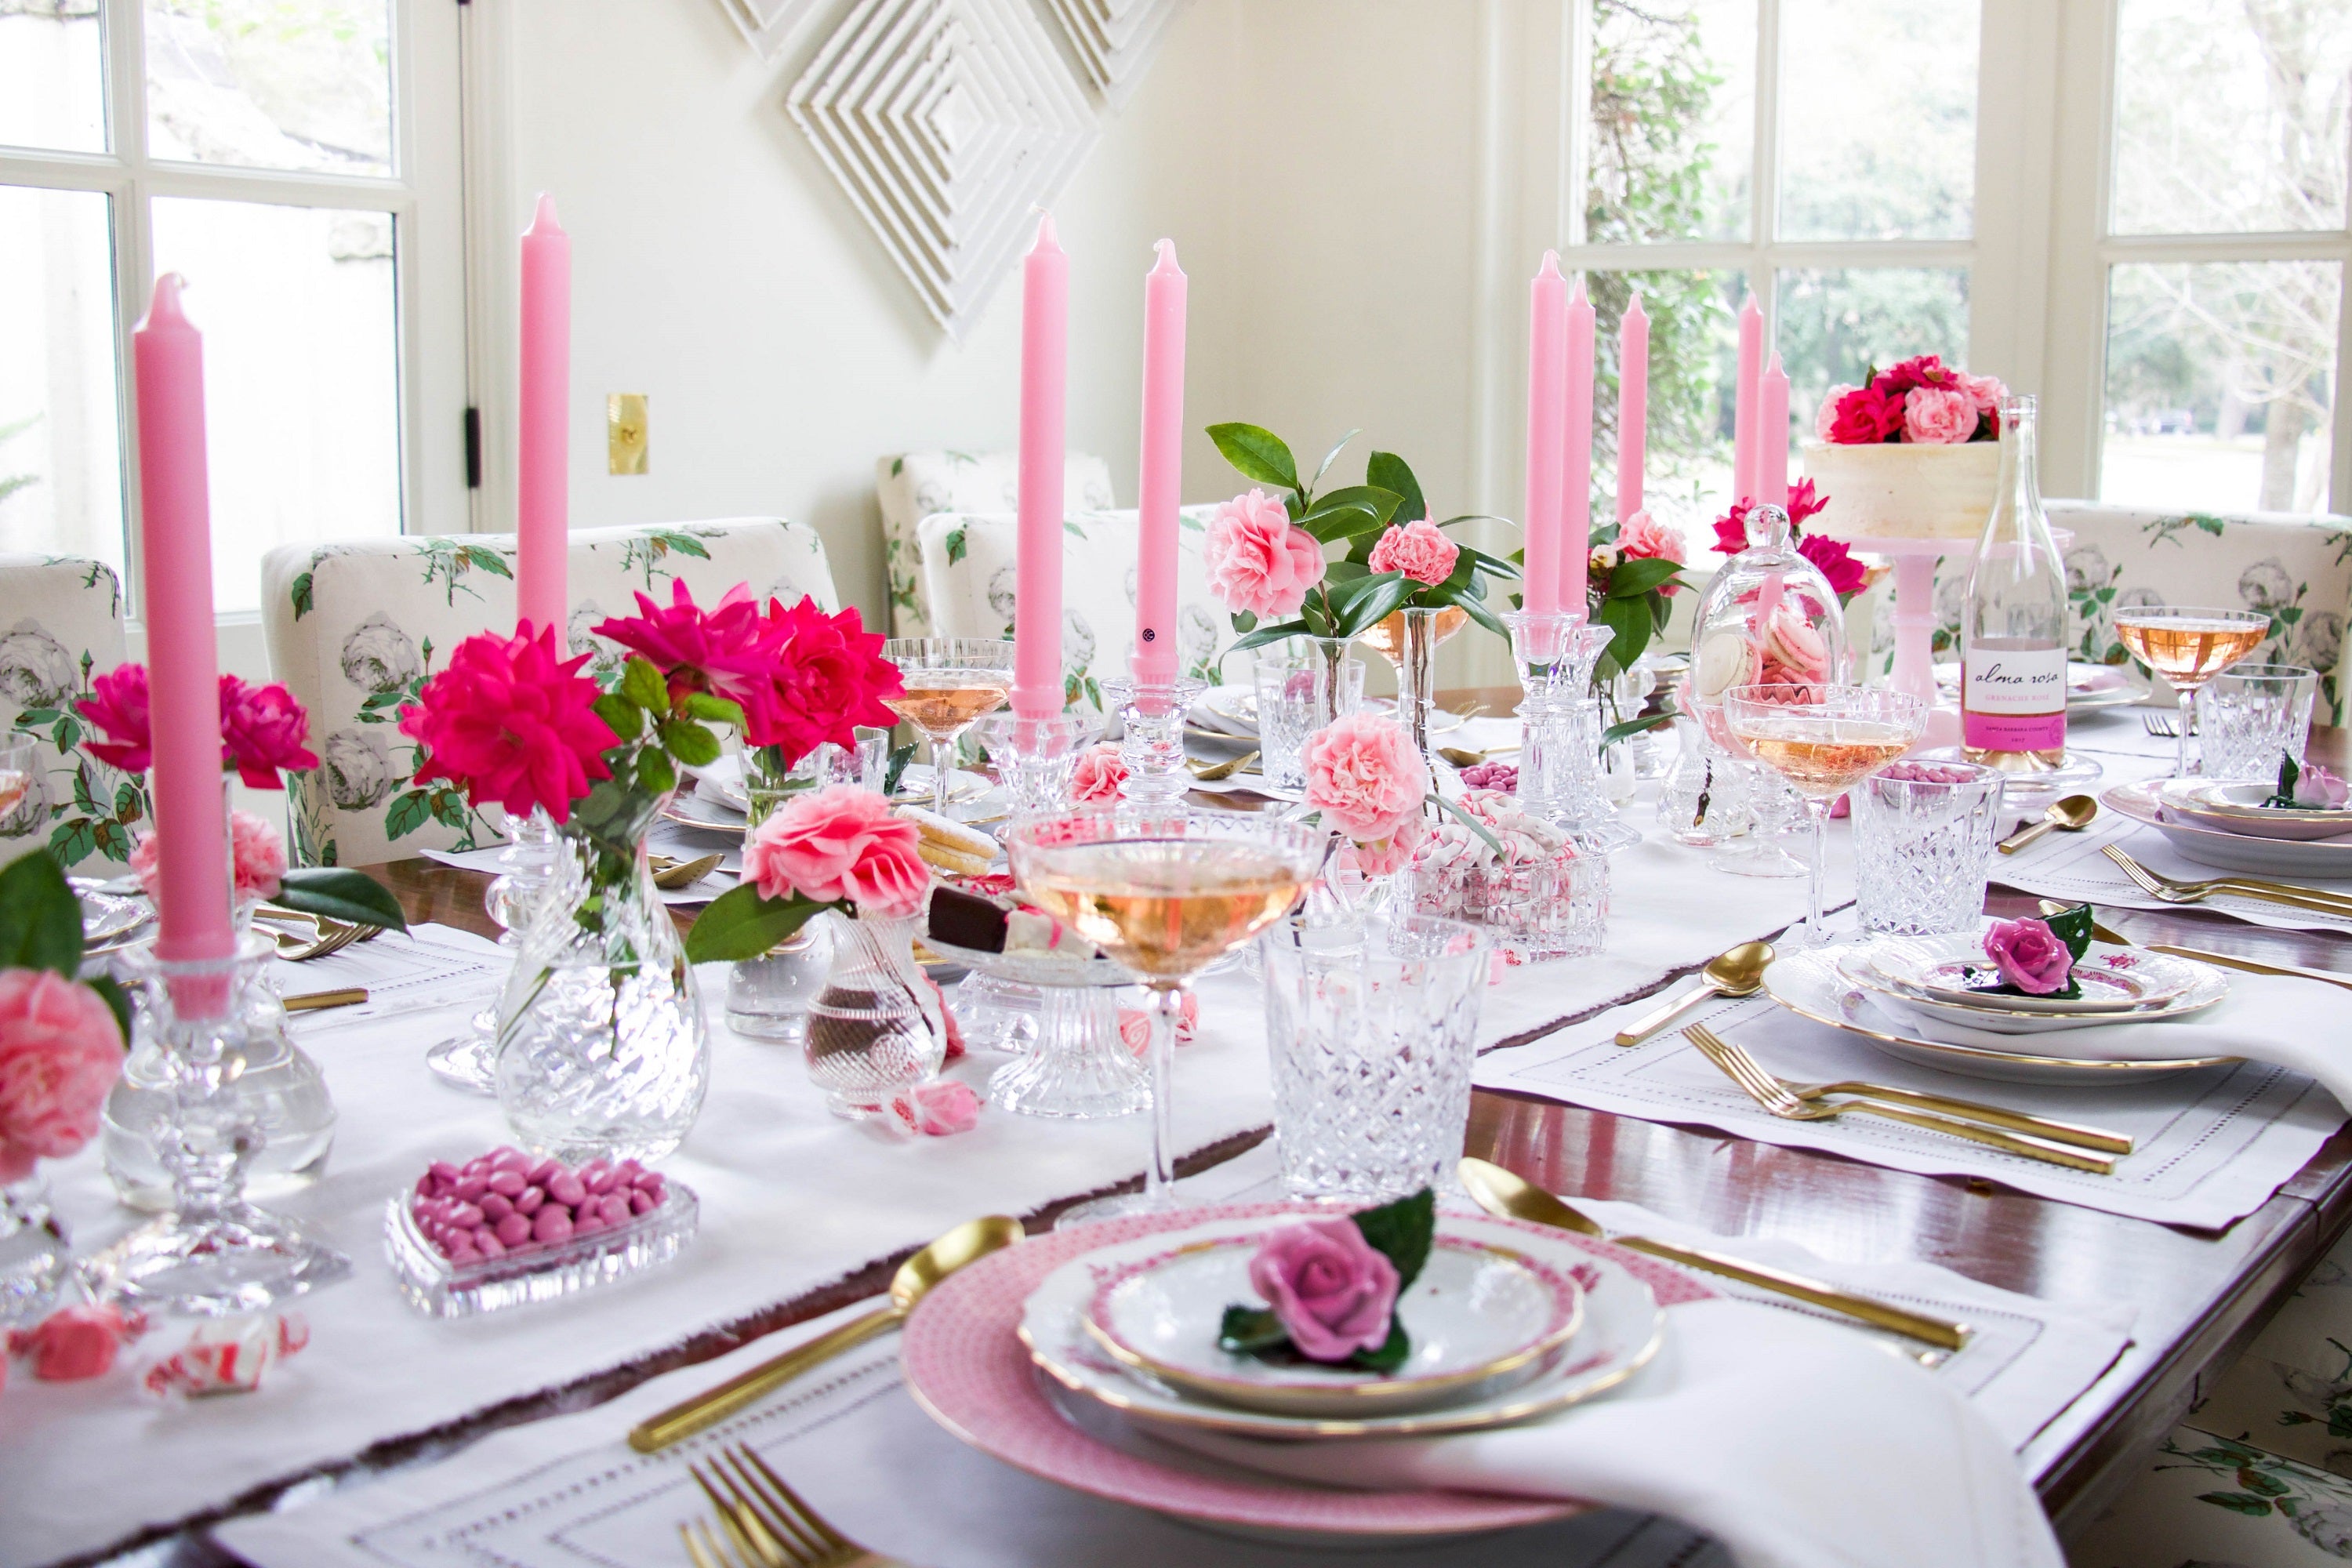 This Tablescape Is Proof Valentine's Day Is Destined To Be Celebrated At Home This Year